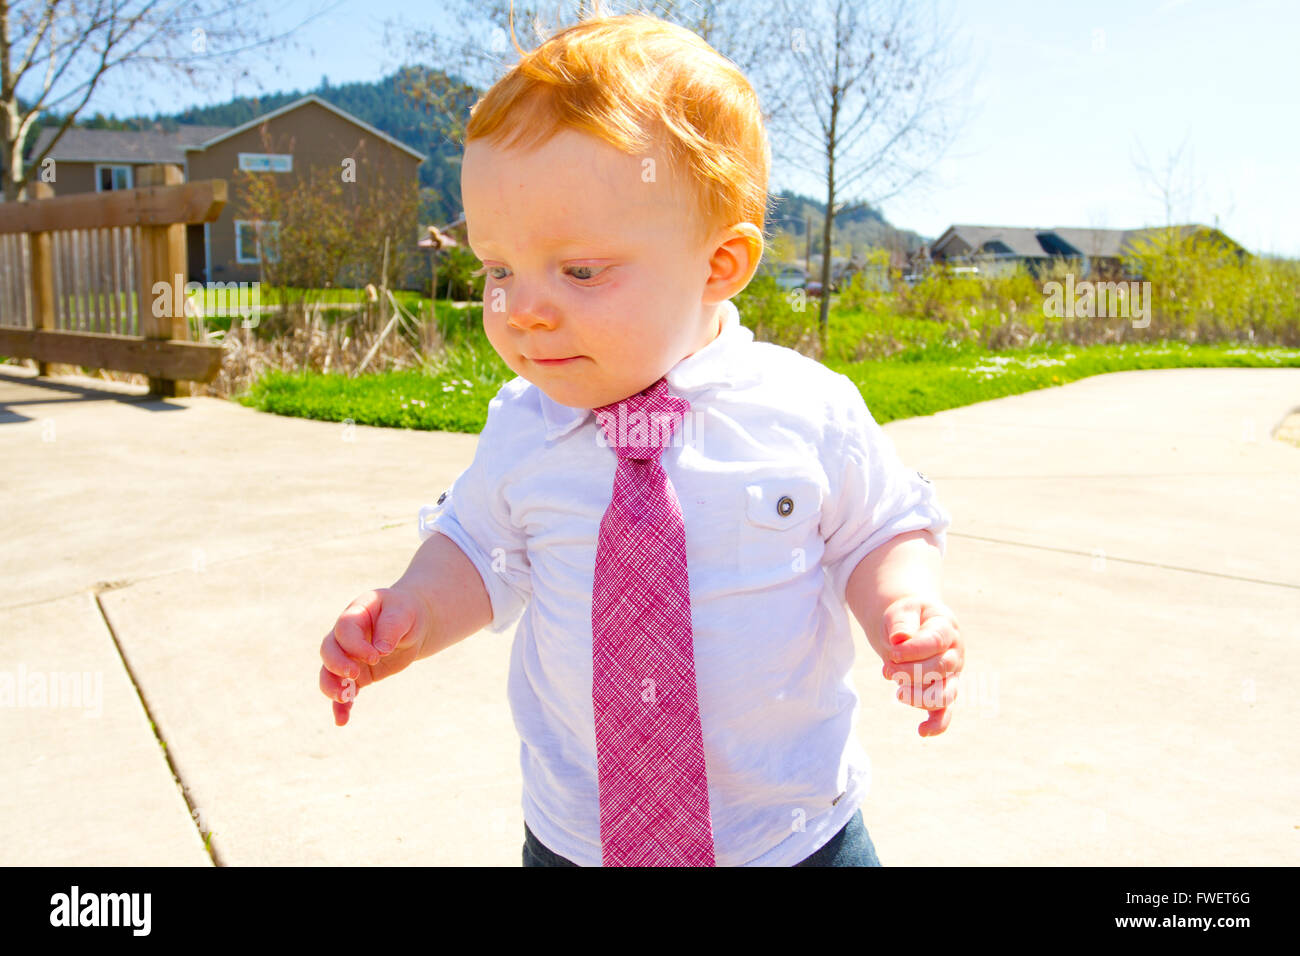 A baby boy plays at the park wearing his Sunday's best clothes including a tie around his neck. Stock Photo